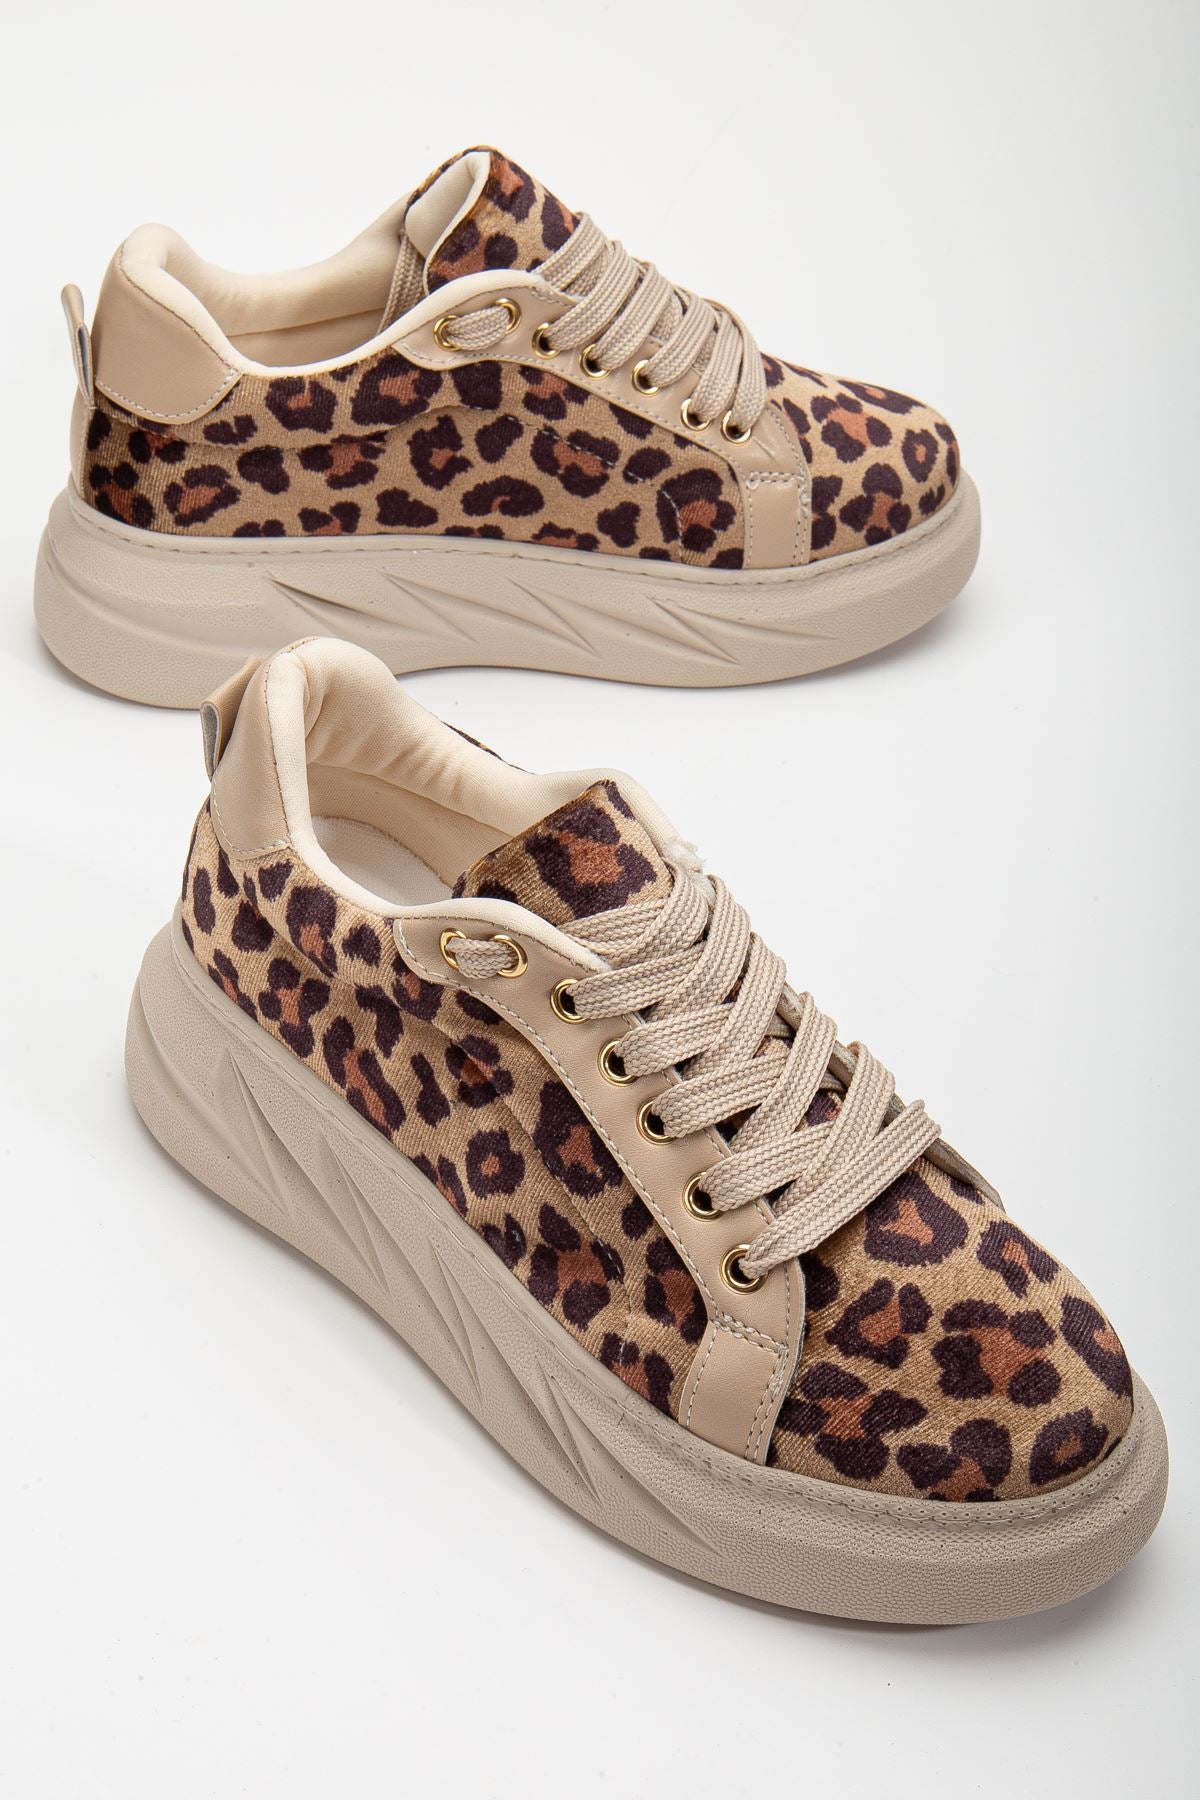 Women's Leopard Velvet Thick Soled Sneakers with Gold Detail - STREETMODE™